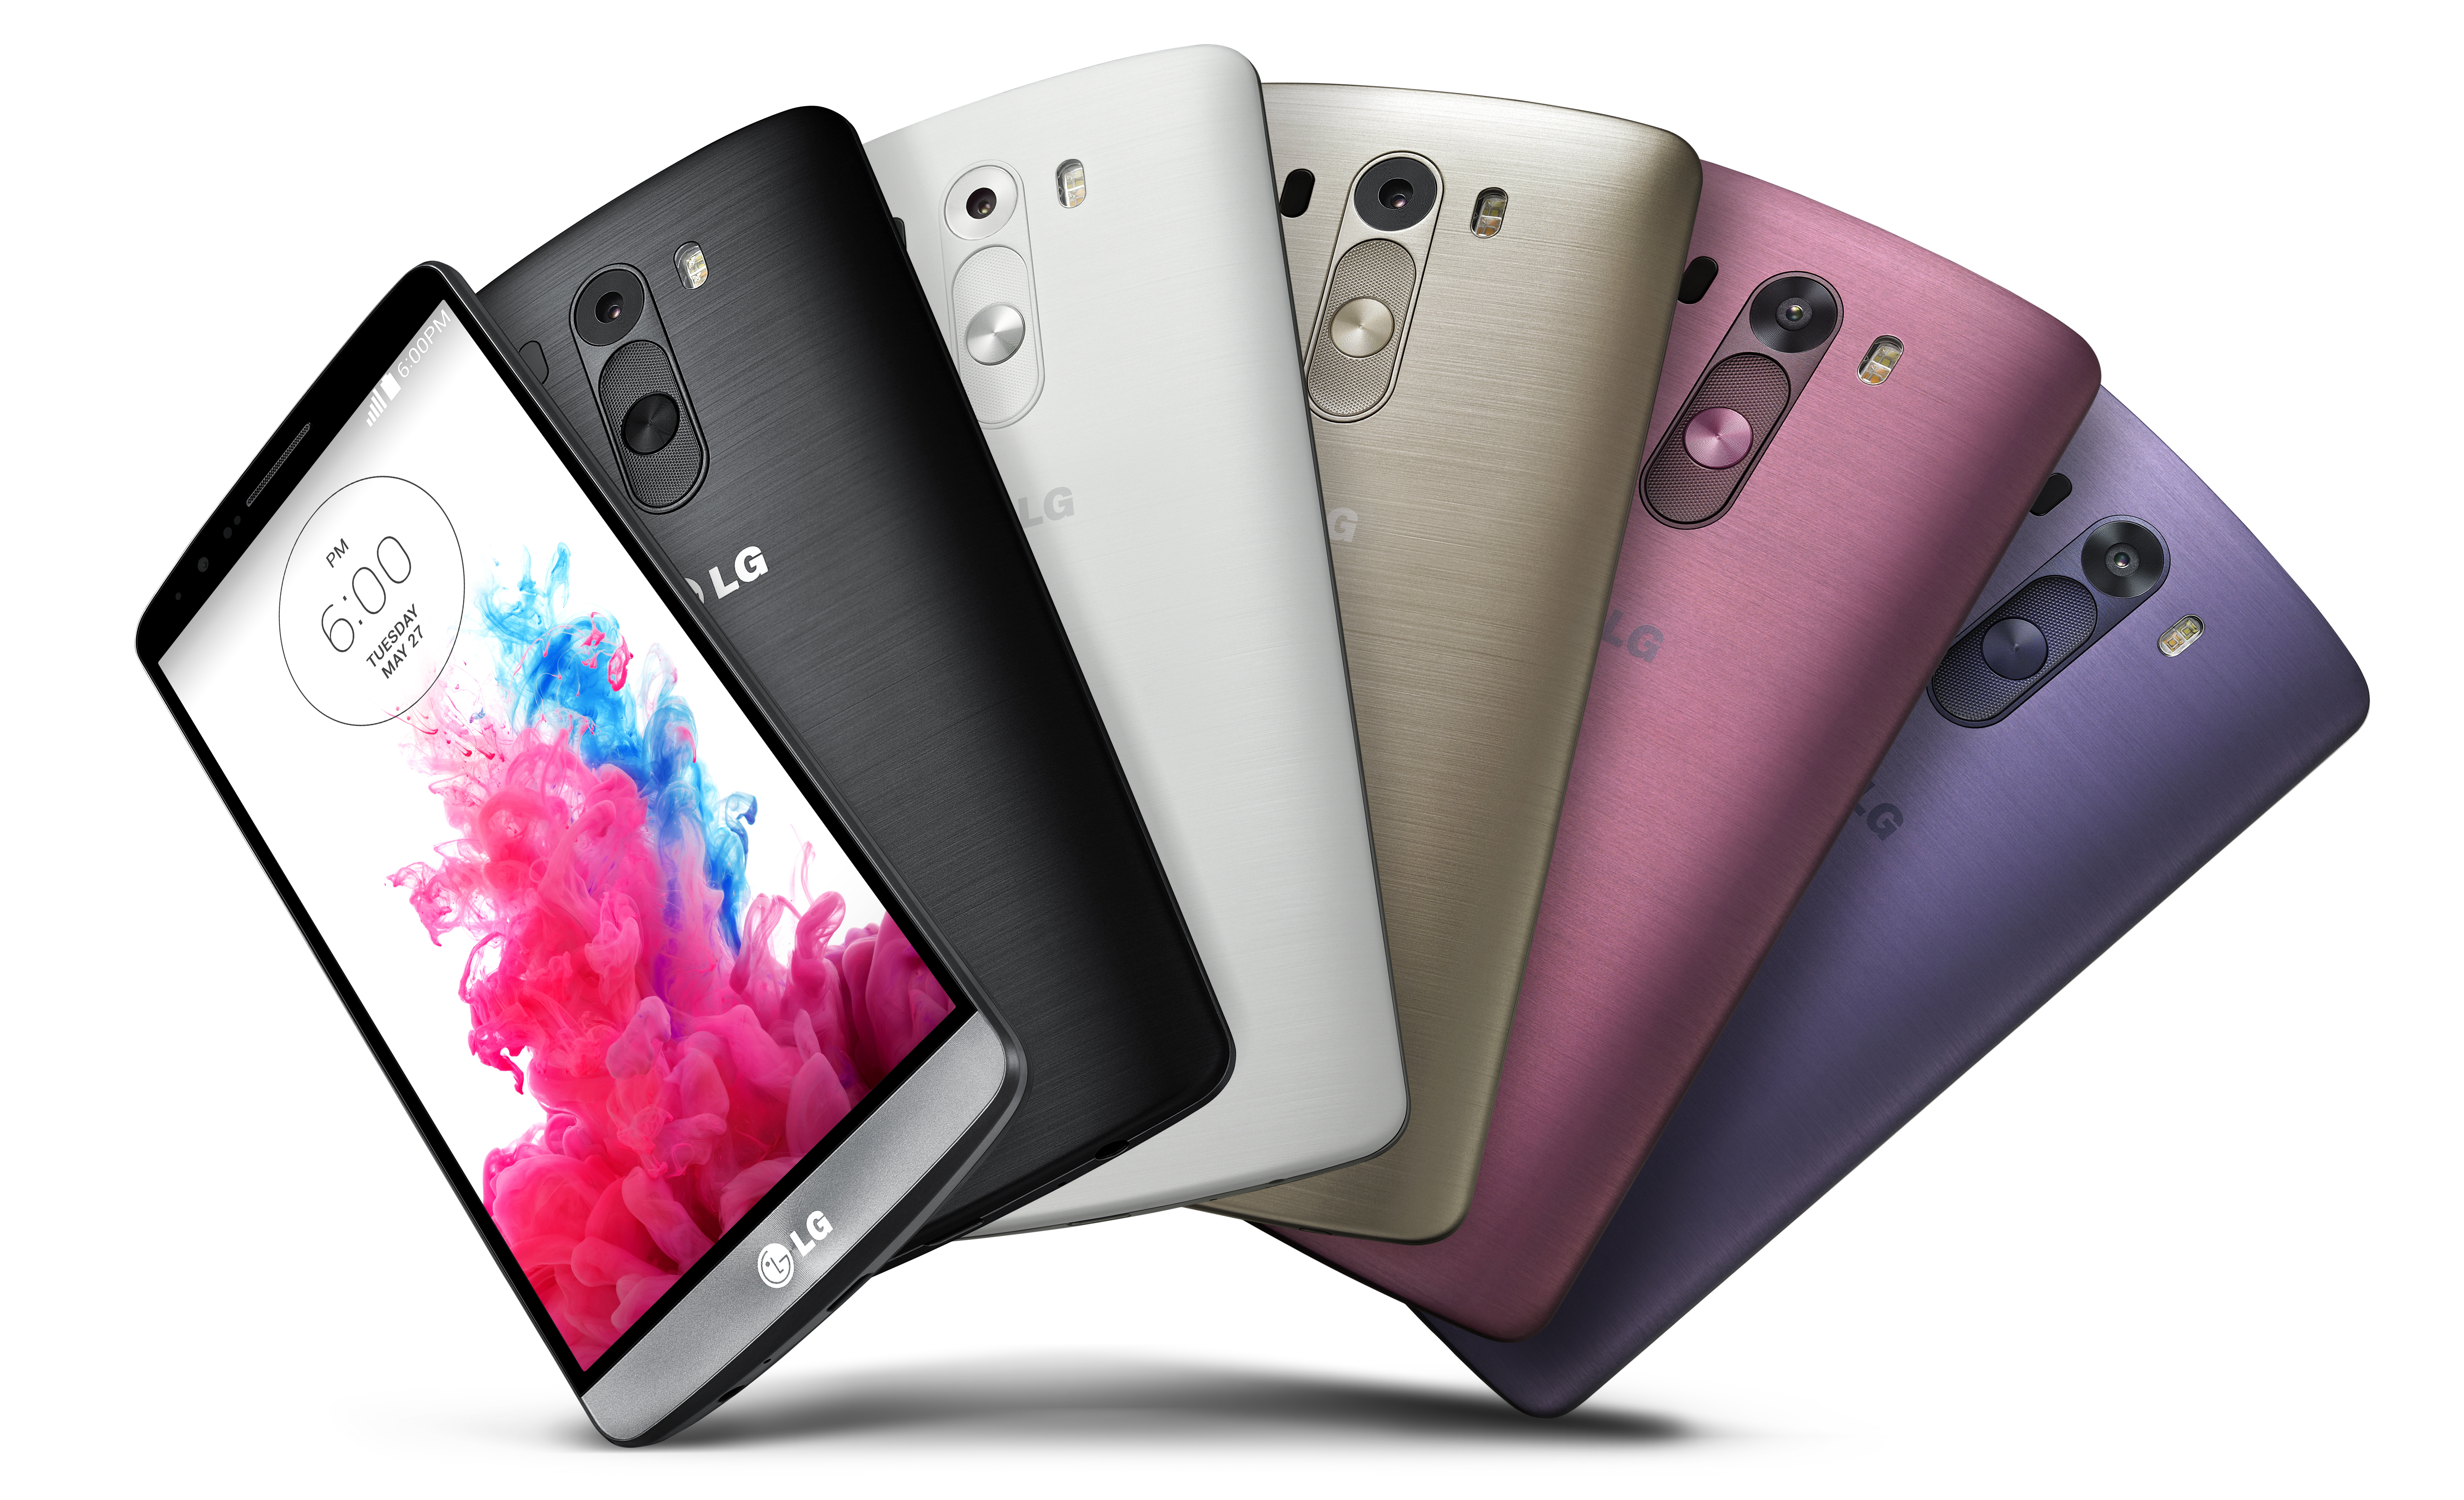 LG listened to customers and launched the LG G3, which quickly became one of the best smartphones on the market.